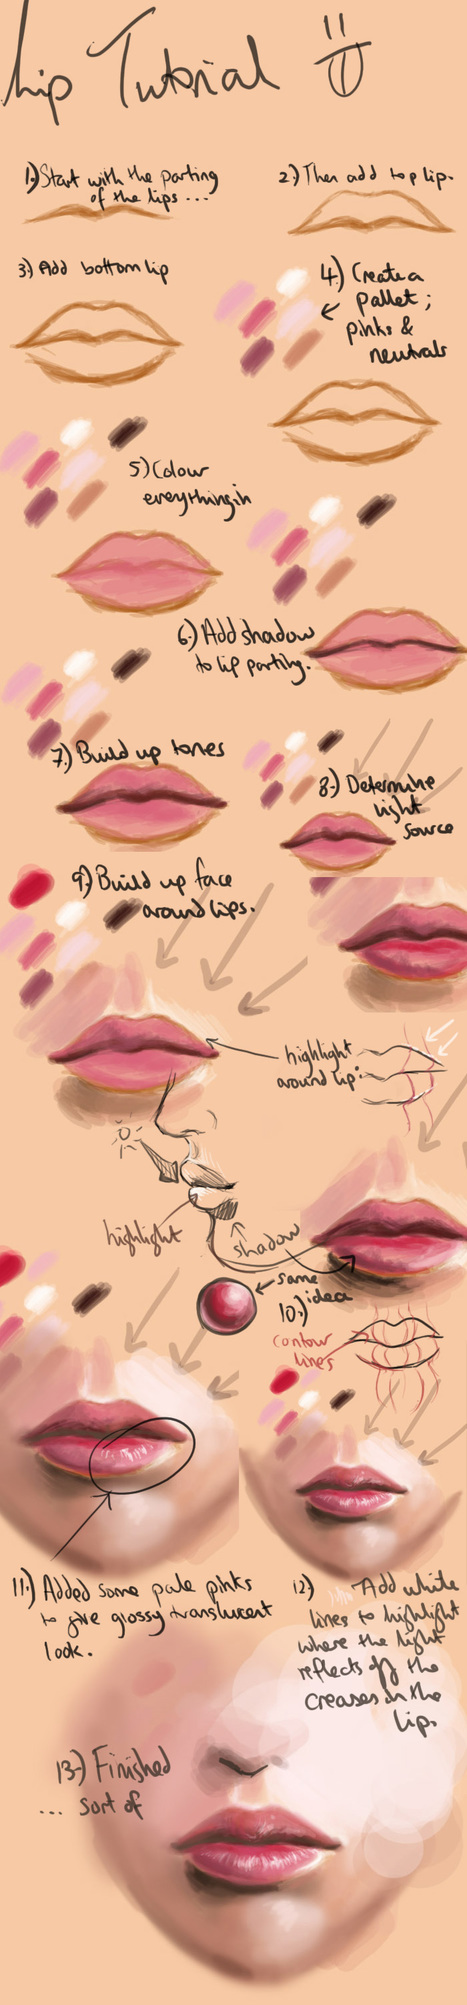 Lips Drawing Tutorial | Drawing and Painting Tutorials | Scoop.it